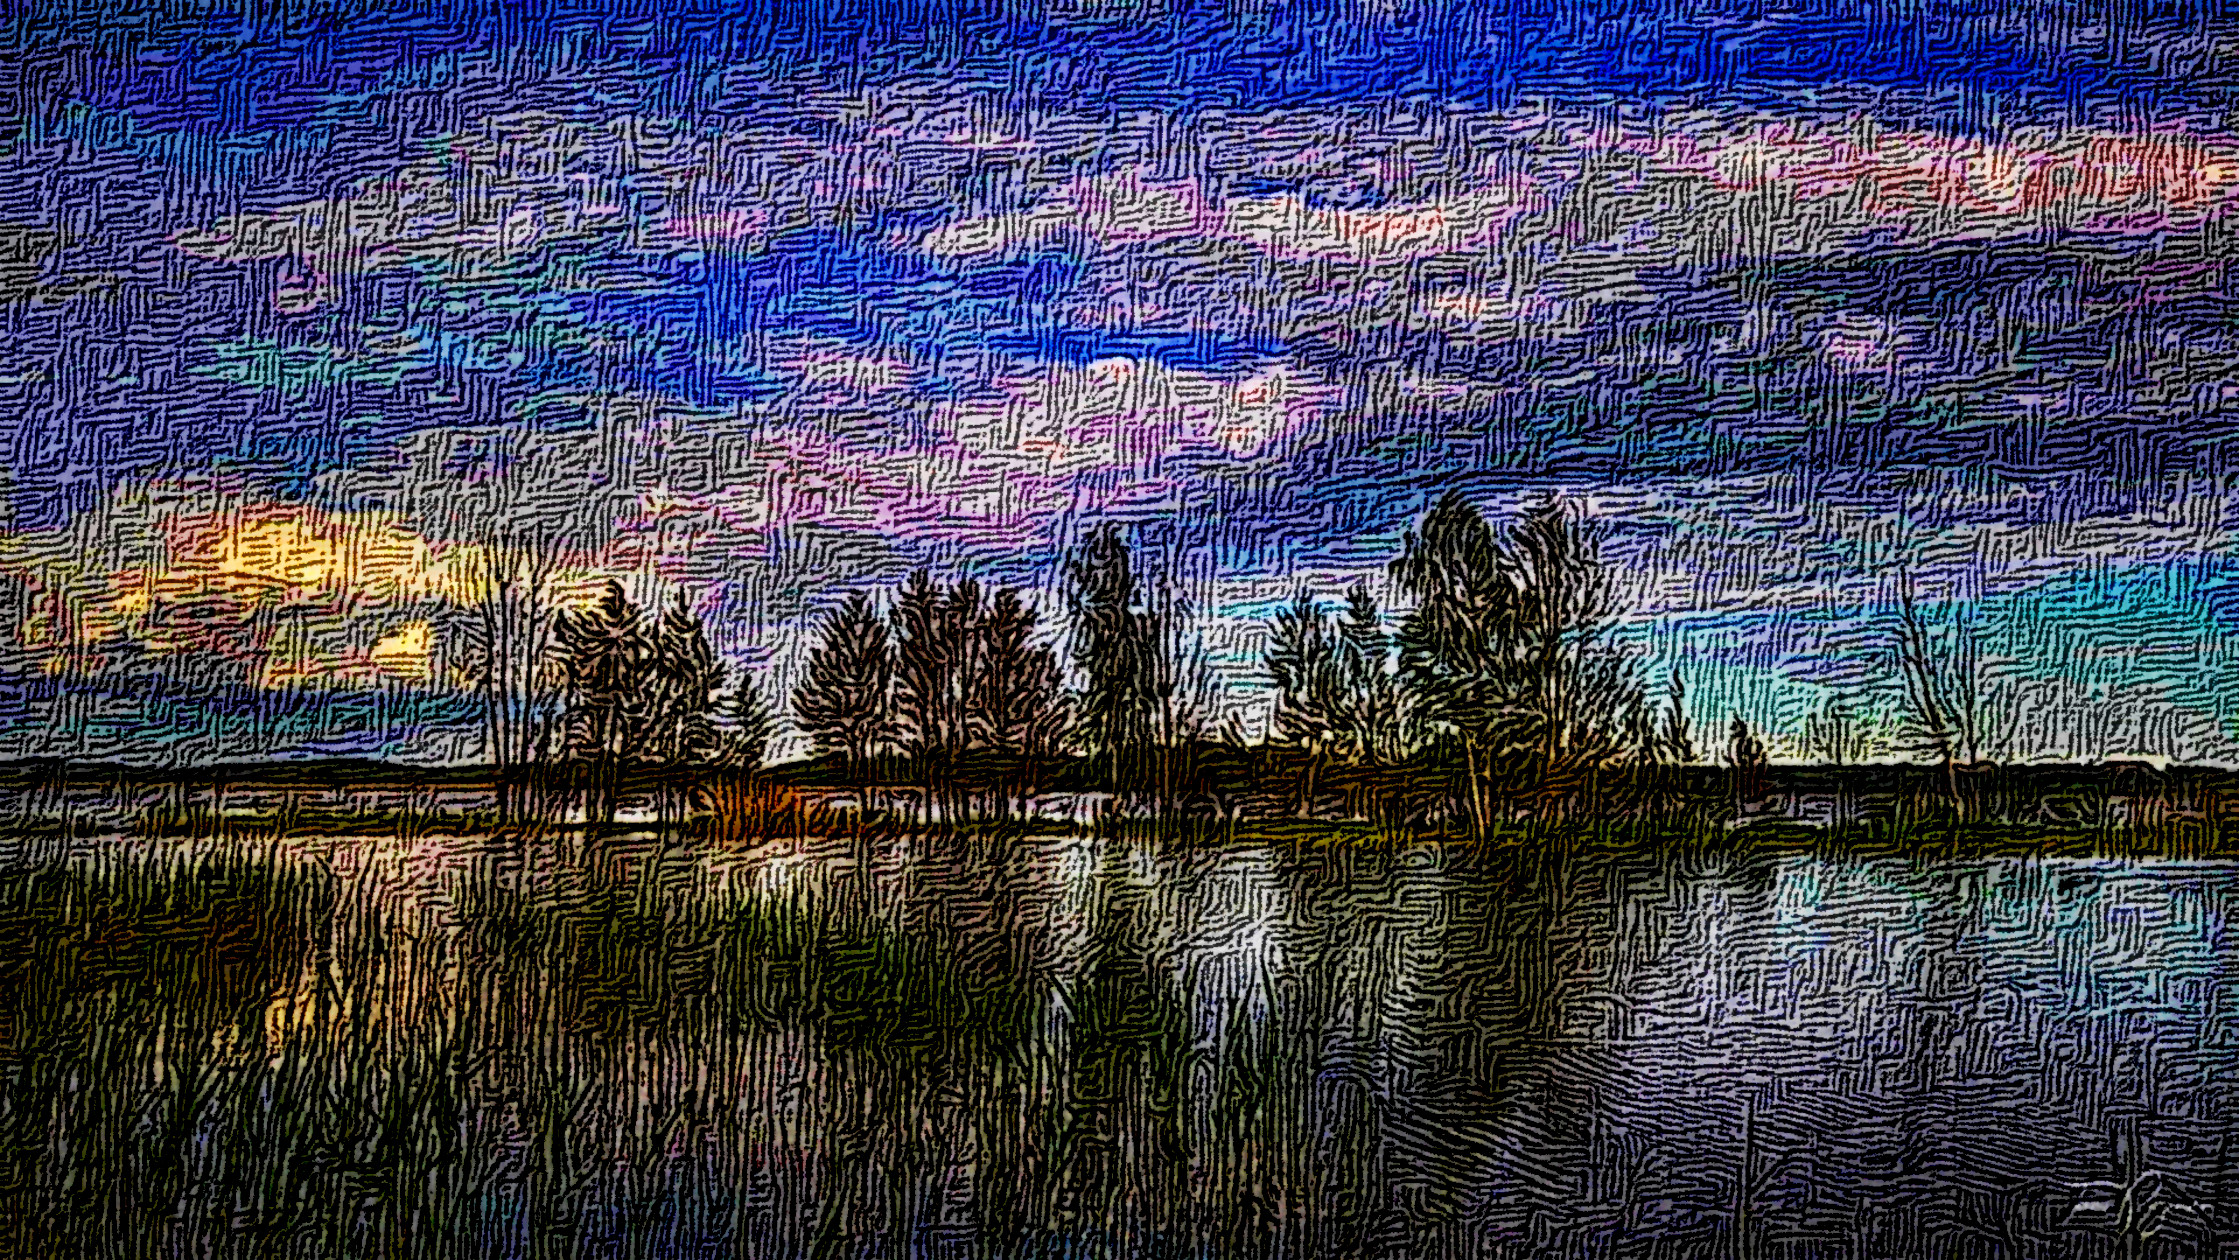 trees_by_the_lagoon_by_pajunen_ddy6duc-DN_DrawEffect_S_Crossed_nb.jpg